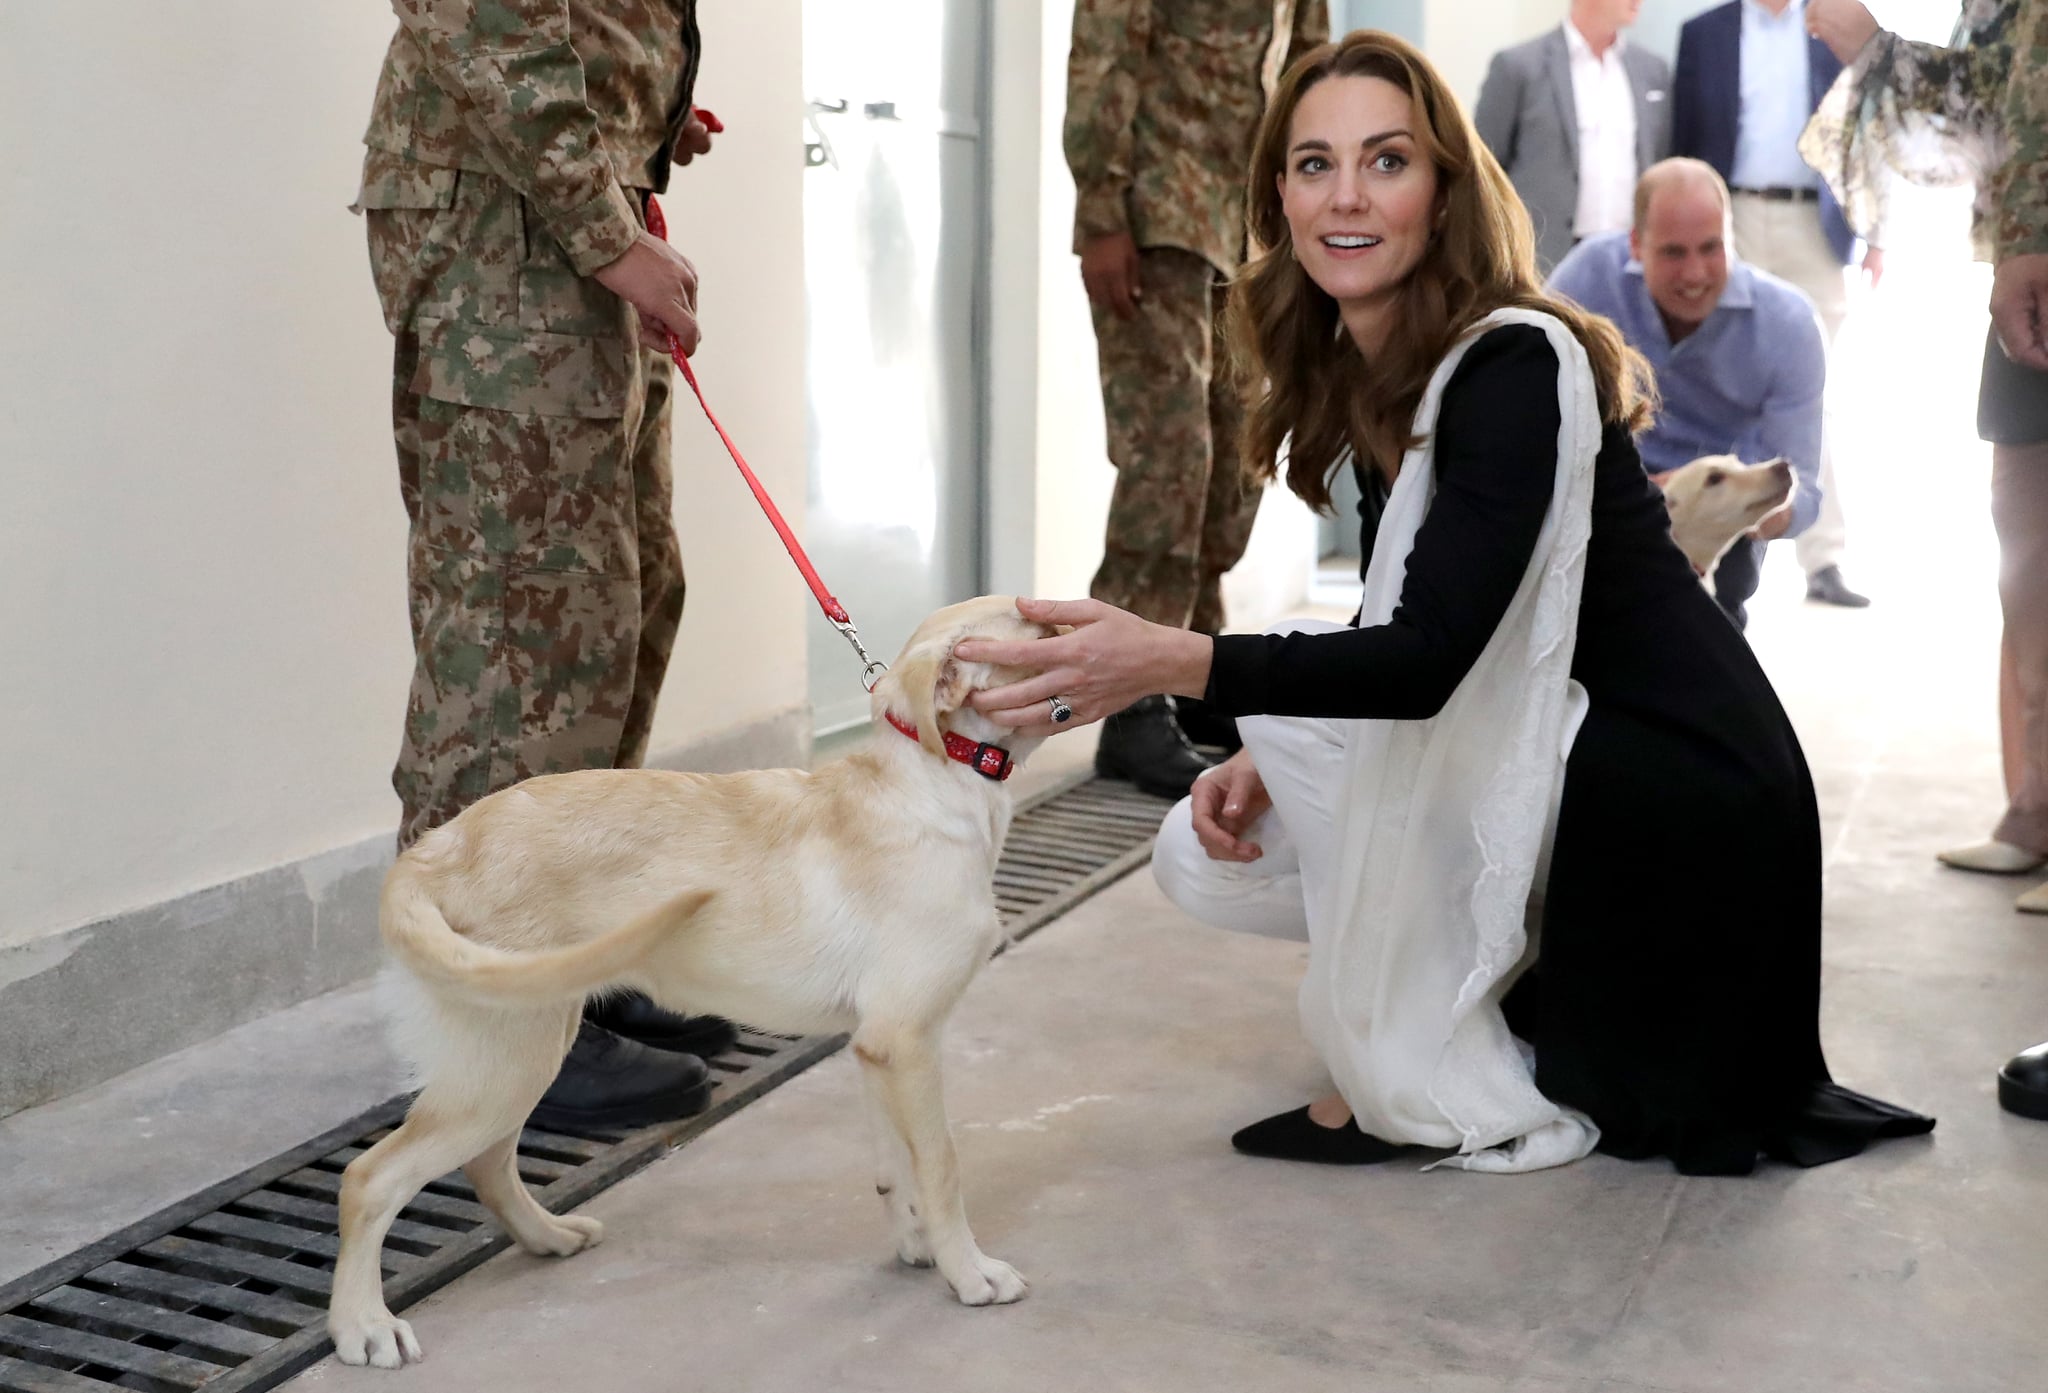 ISLAMABAD, PAKISTAN - OCTOBER 18:  Catherine, Duchess of Cambridge with golden labrador puppies Salto and Sky as she visits an Army Canine Centre with Prince William, Duke of Cambridge, where the UK provides support to a programme that trains dogs to identify explosive devices, during day five of their royal tour of Pakistan on October 18, 2019 in Islamabad, Pakistan. (Photo by Chris Jackson - Pool/Getty Images)